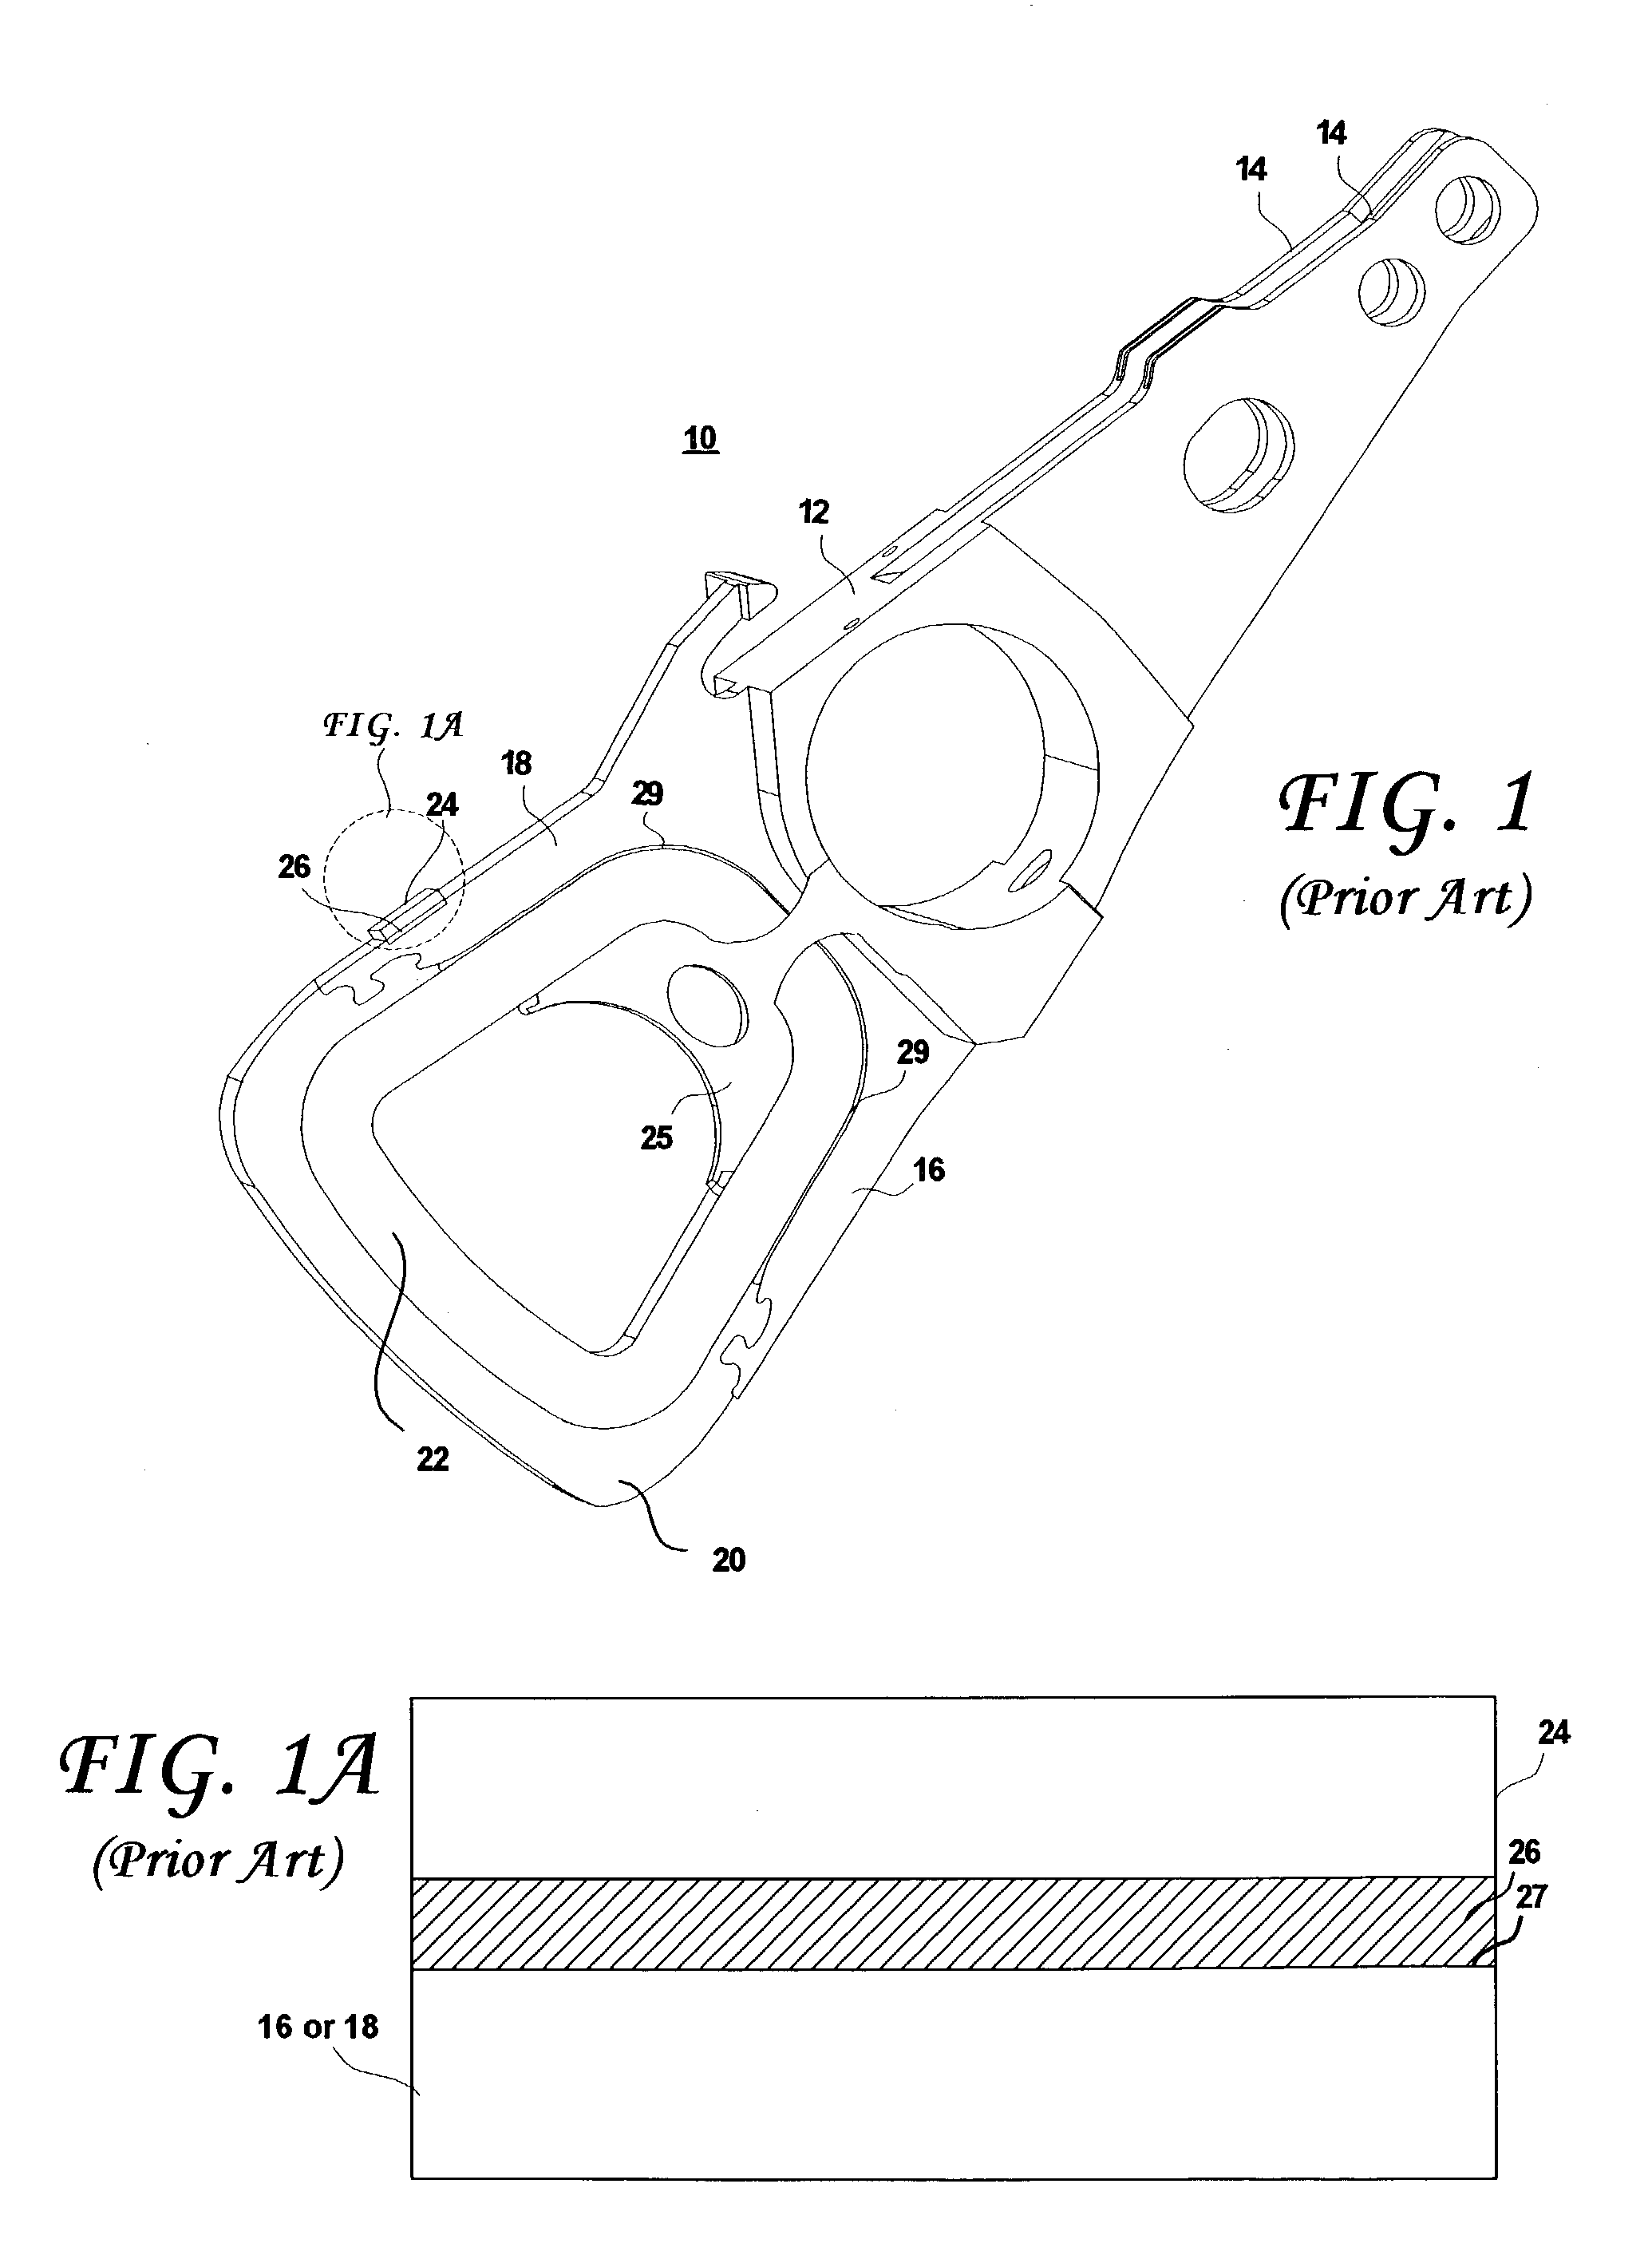 Cleating features to improve adhesive interface between an actuator tang and a tang-supporting surface of an actuator assembly of a hard disk drive